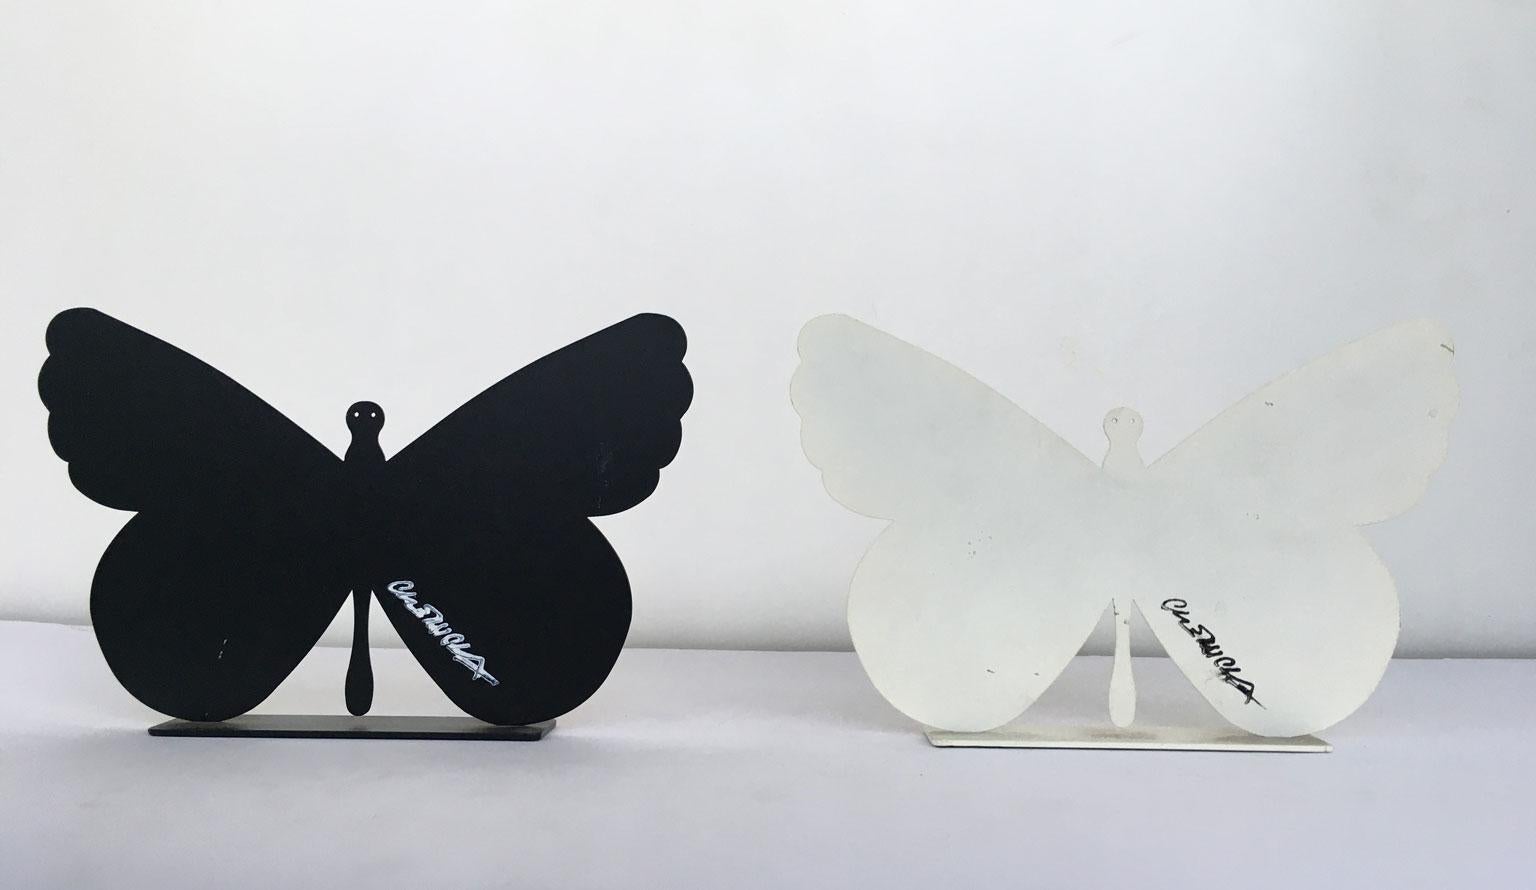 Italy 1980 Bruno Chersicla Volavola Black Painted Metal Sculpture Butterfly For Sale 4